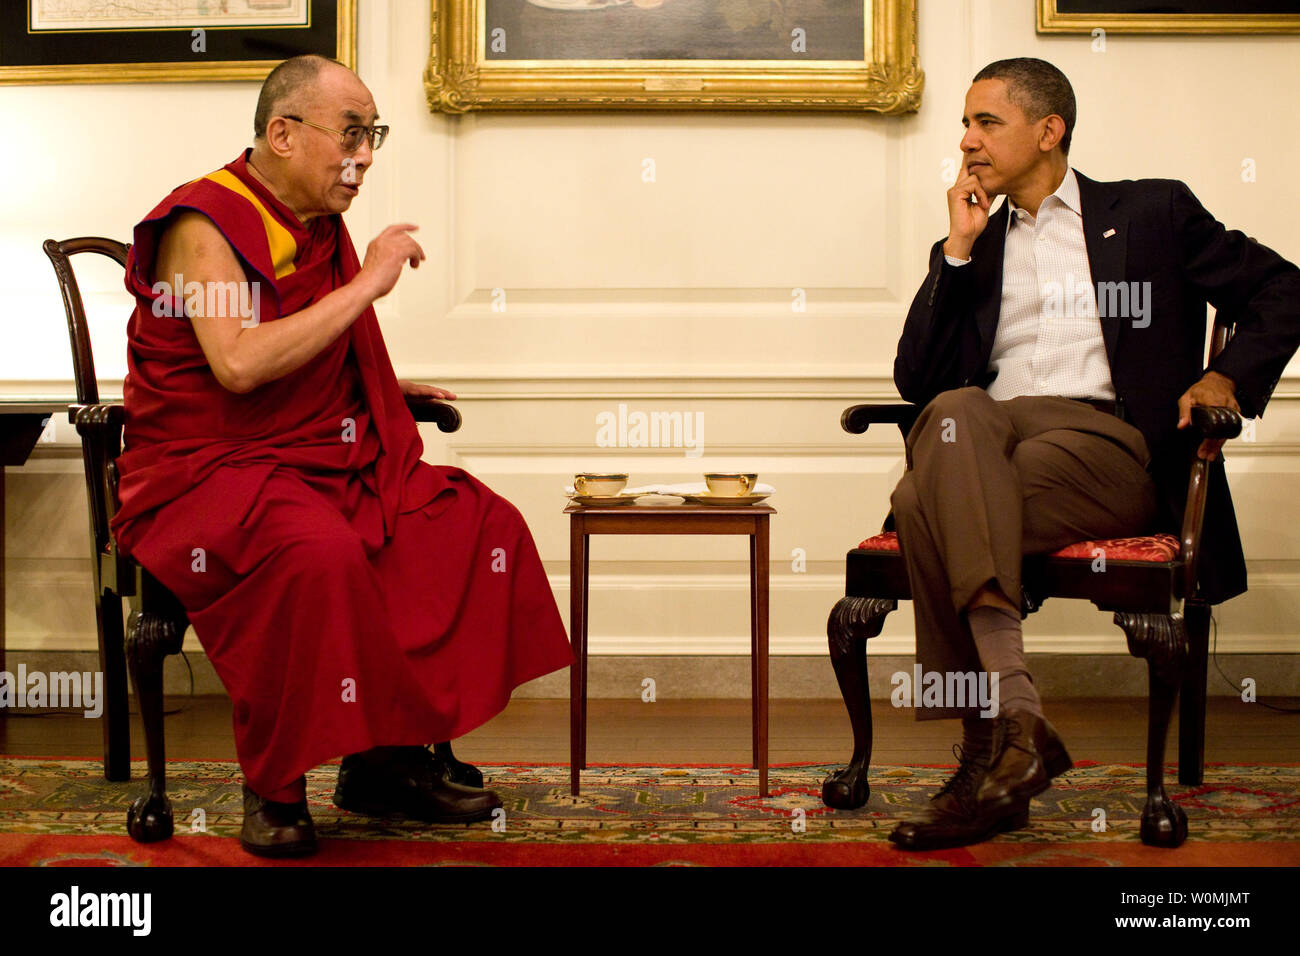 President Barack Obama meets with His Holiness the XIV Dalai Lama in the Map Room of the White House in Washington, D.C. on July 16, 2011. UPI/Pete Souza/White House. Stock Photo